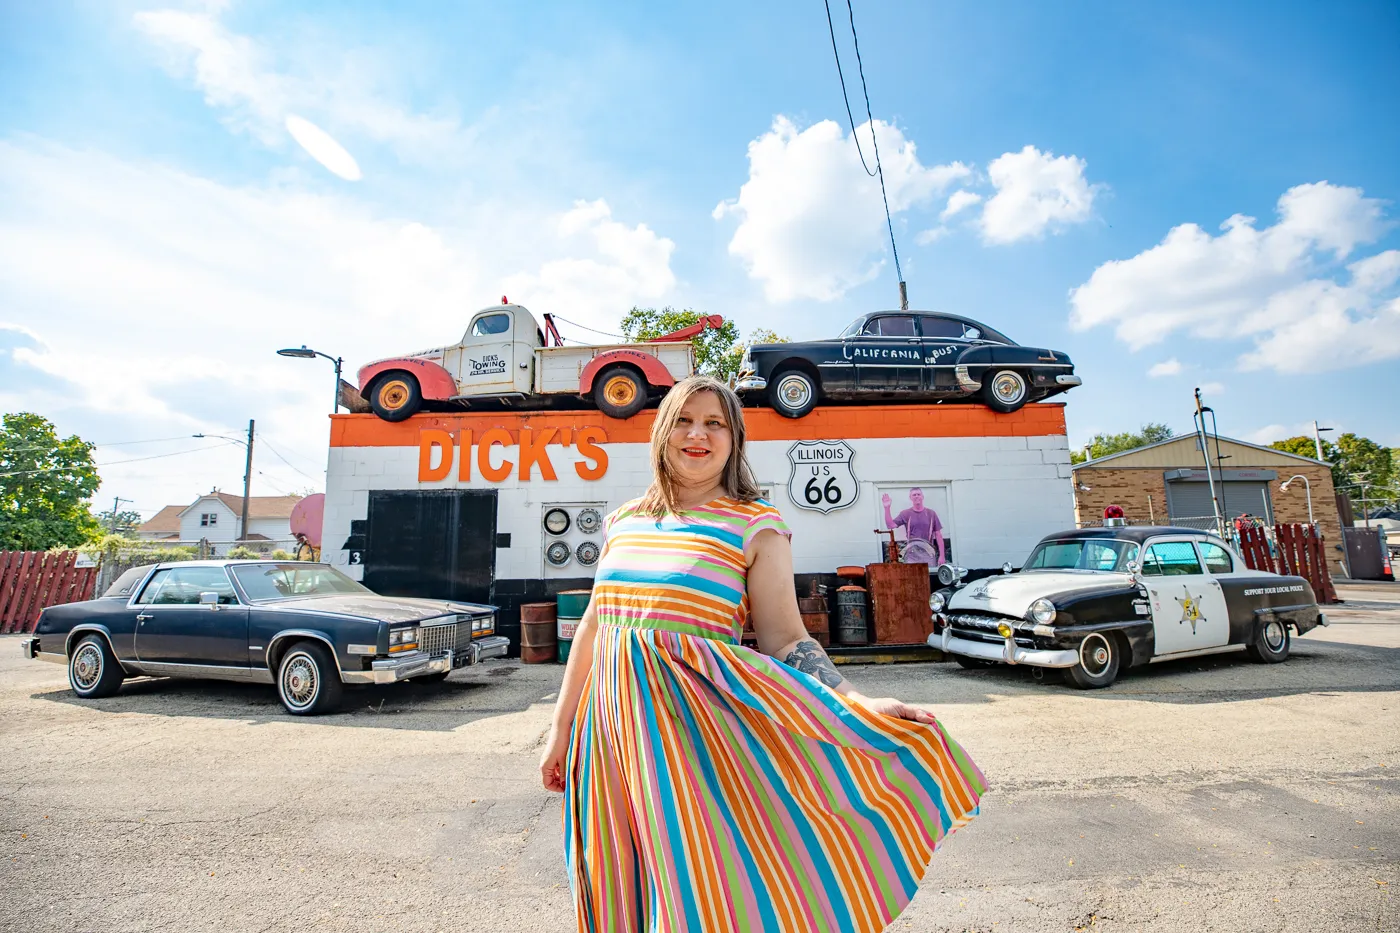 Dick's on 66 - Dick's Towing in Joliet, Illinois Route 66 Attraction